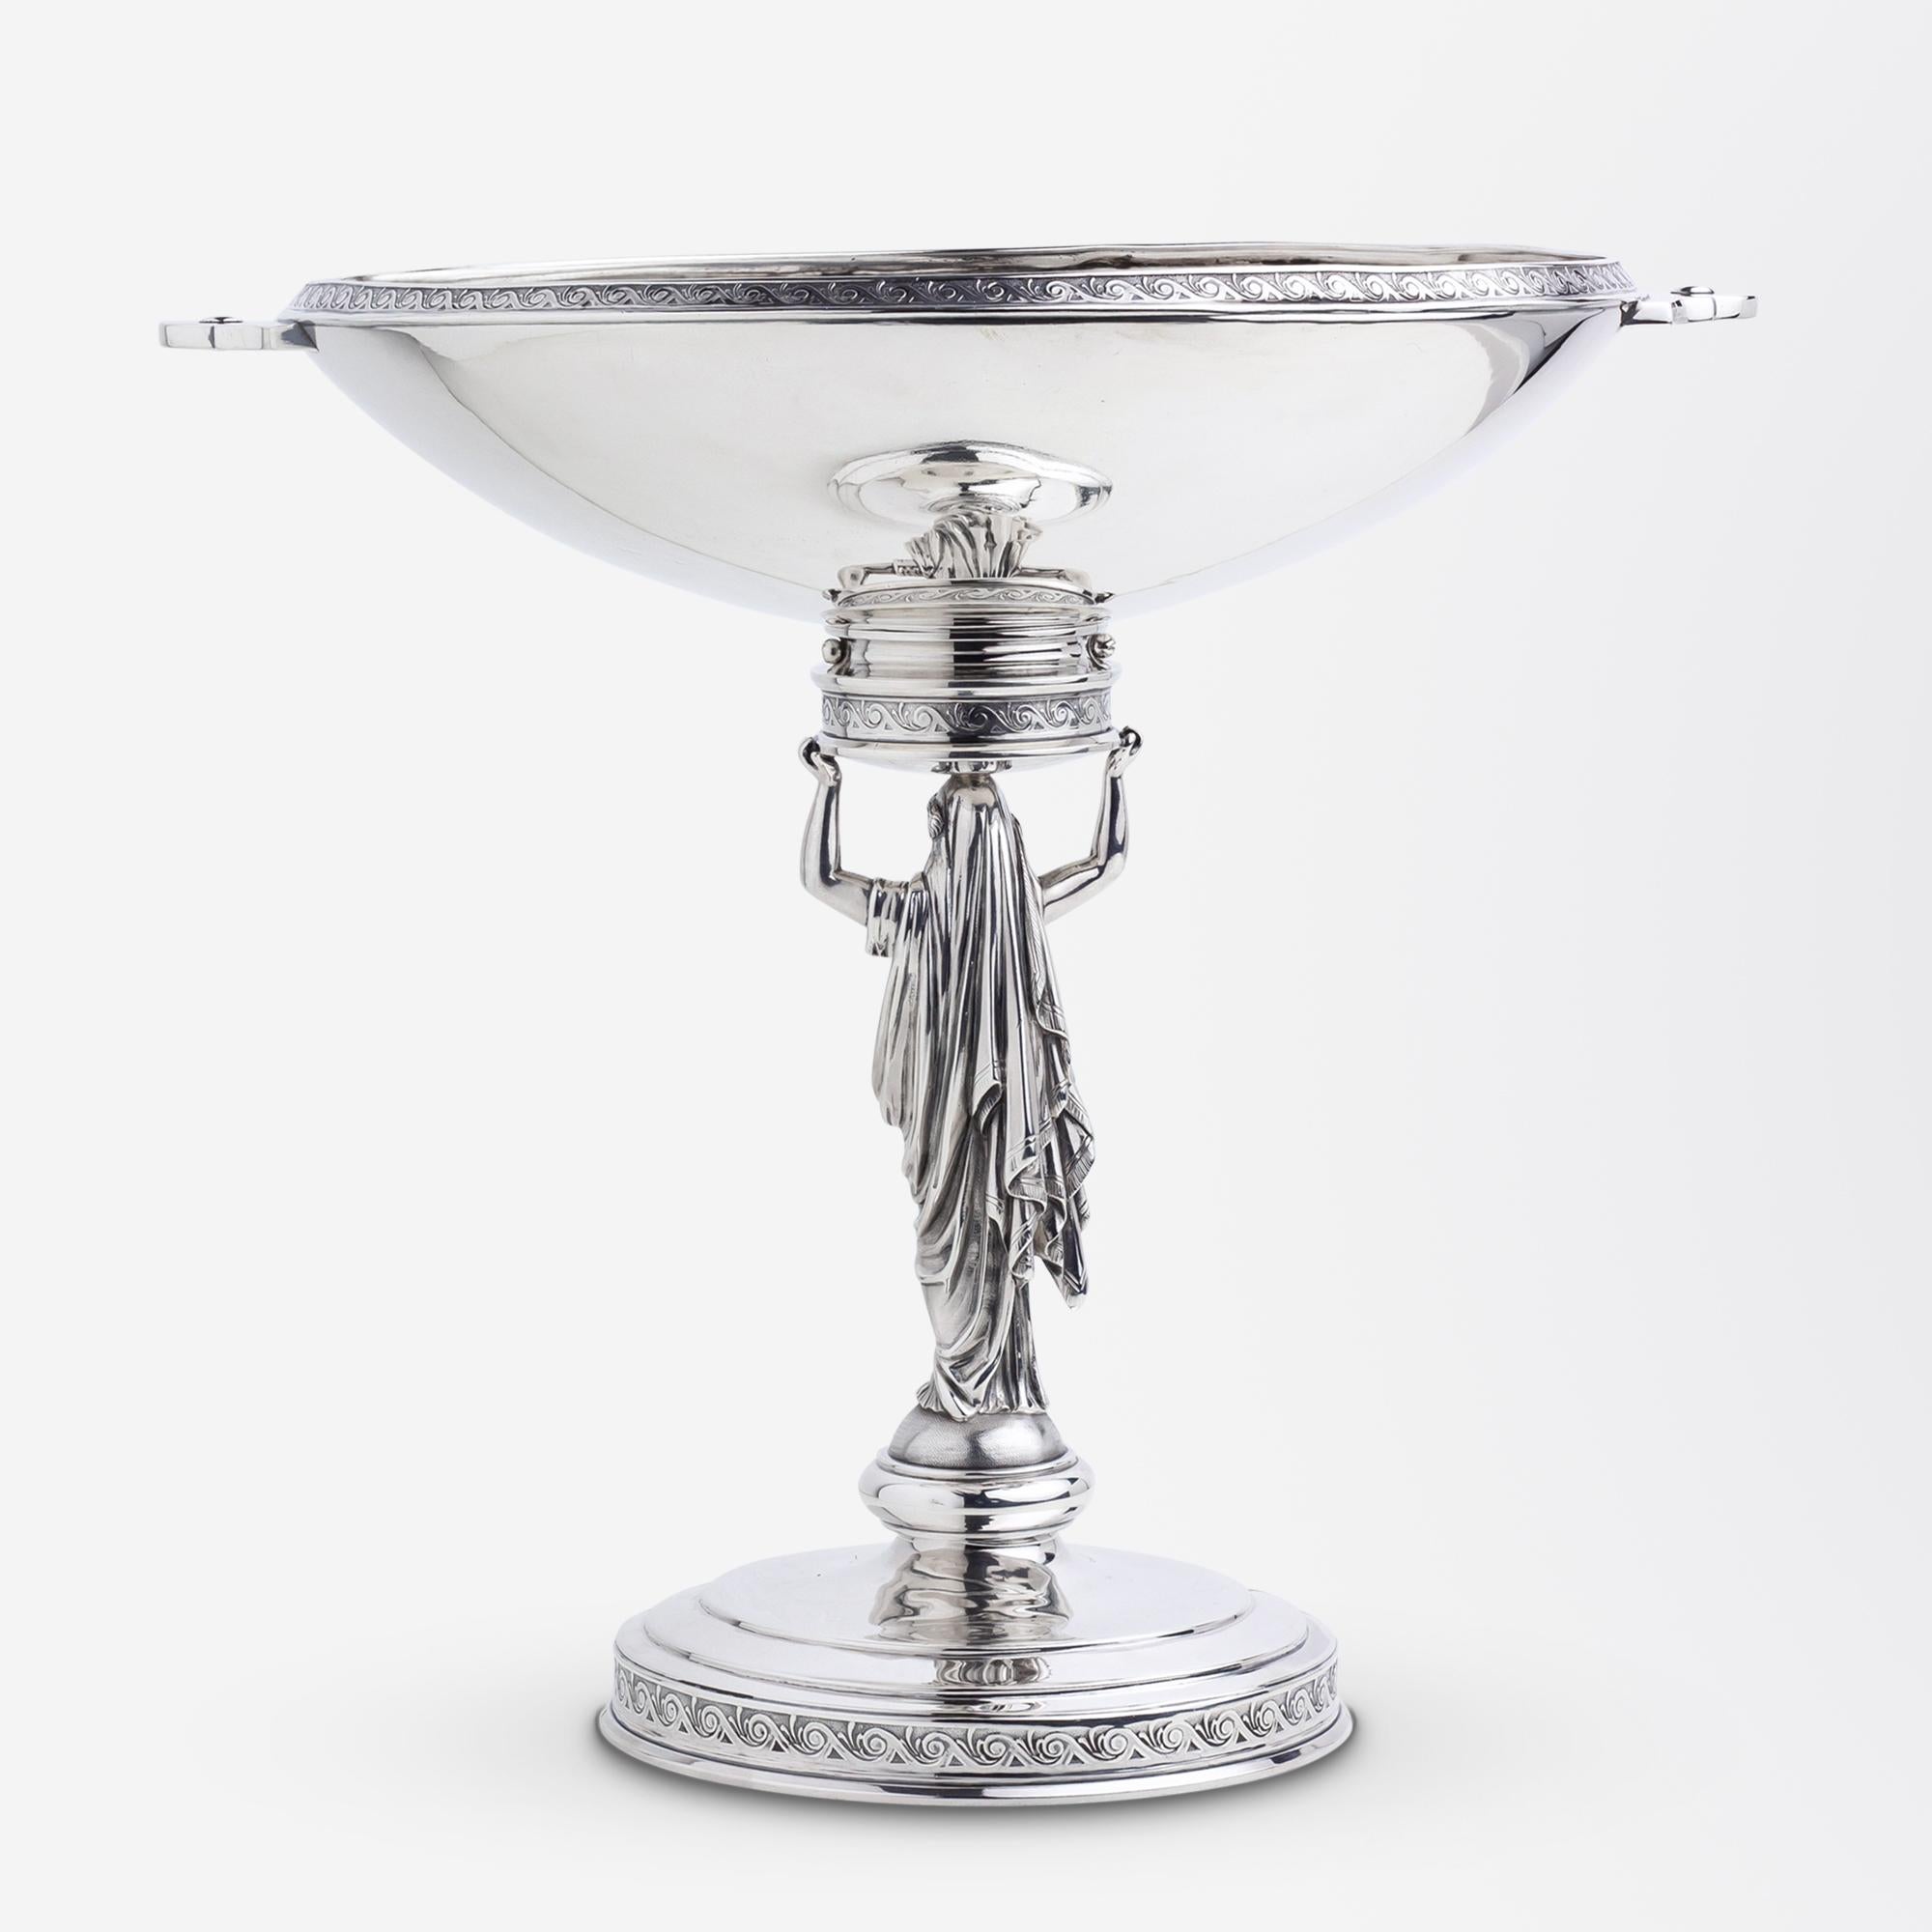 Neoclassical Sterling Tazza or Footed Comport Attributed to John R. Wendt, circa 1870 For Sale